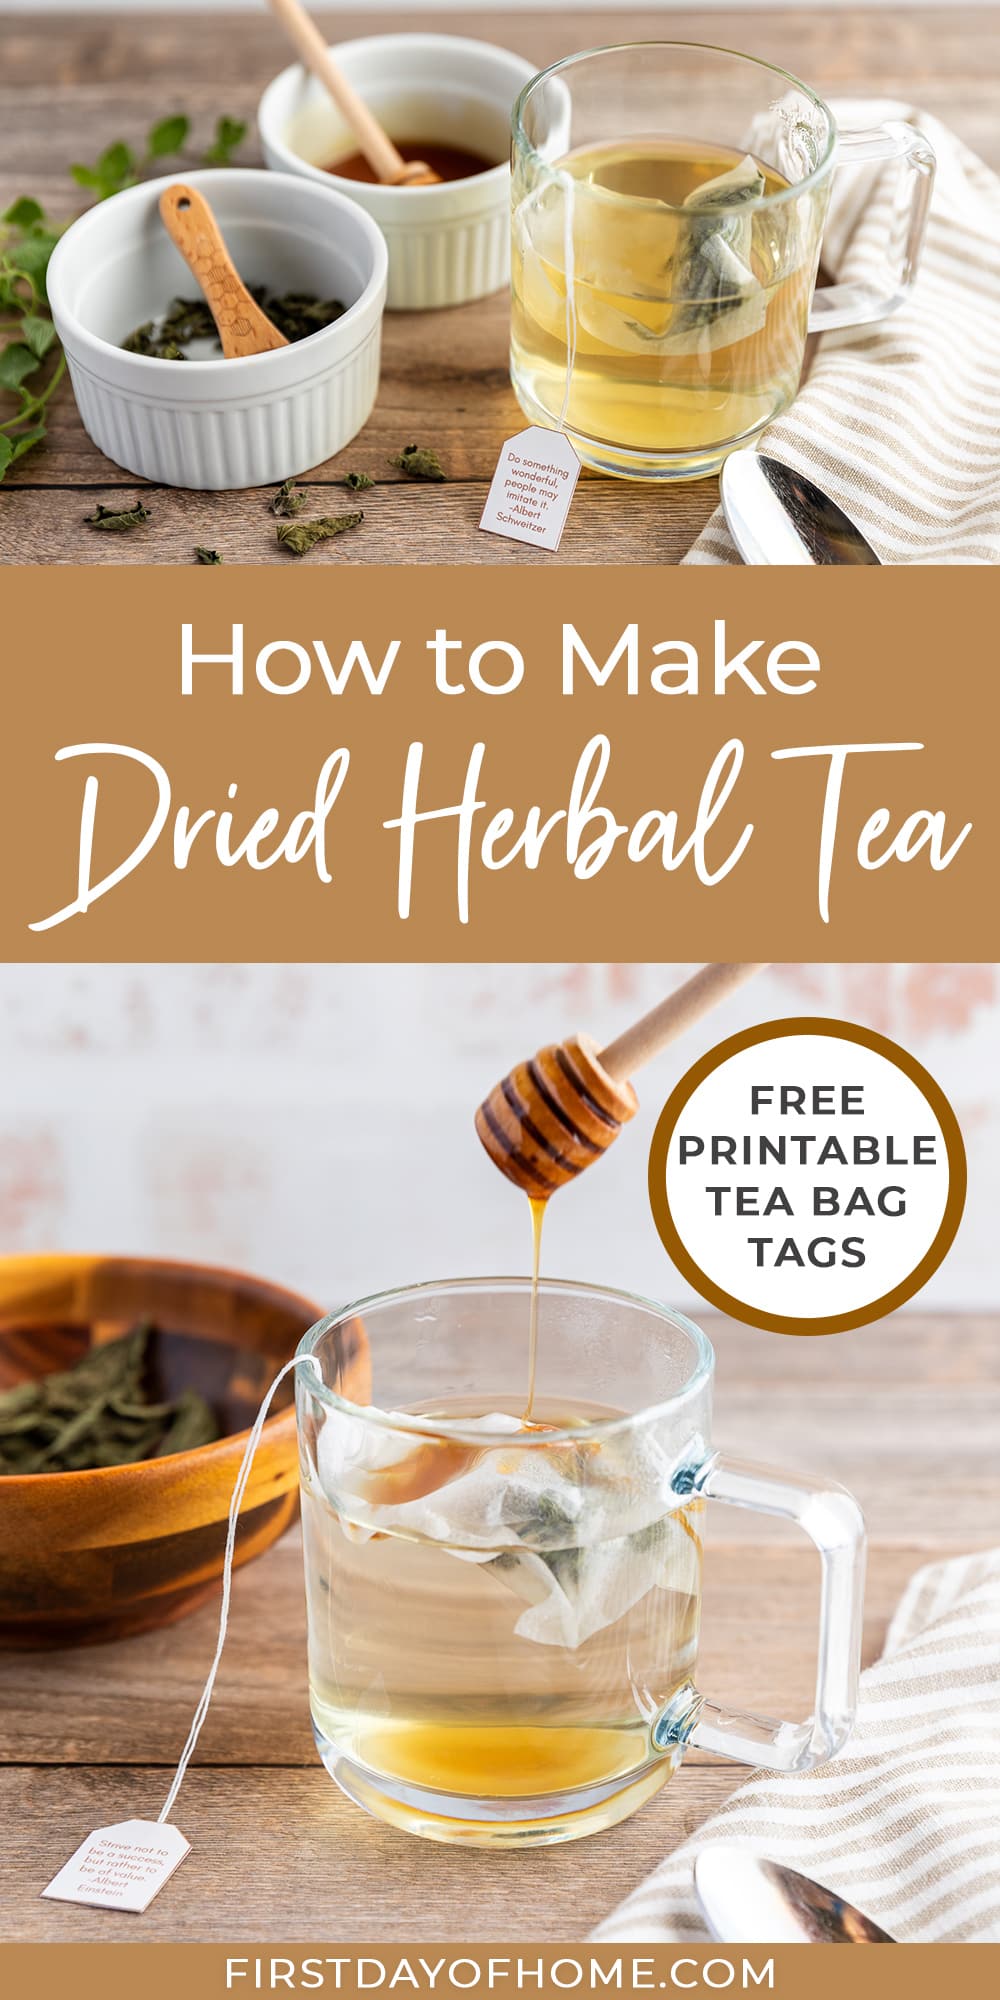 Herbal tea made with dried herbs, shown with honey and tea towels. Text overlay reads "How to Make Dried Herbal Tea"